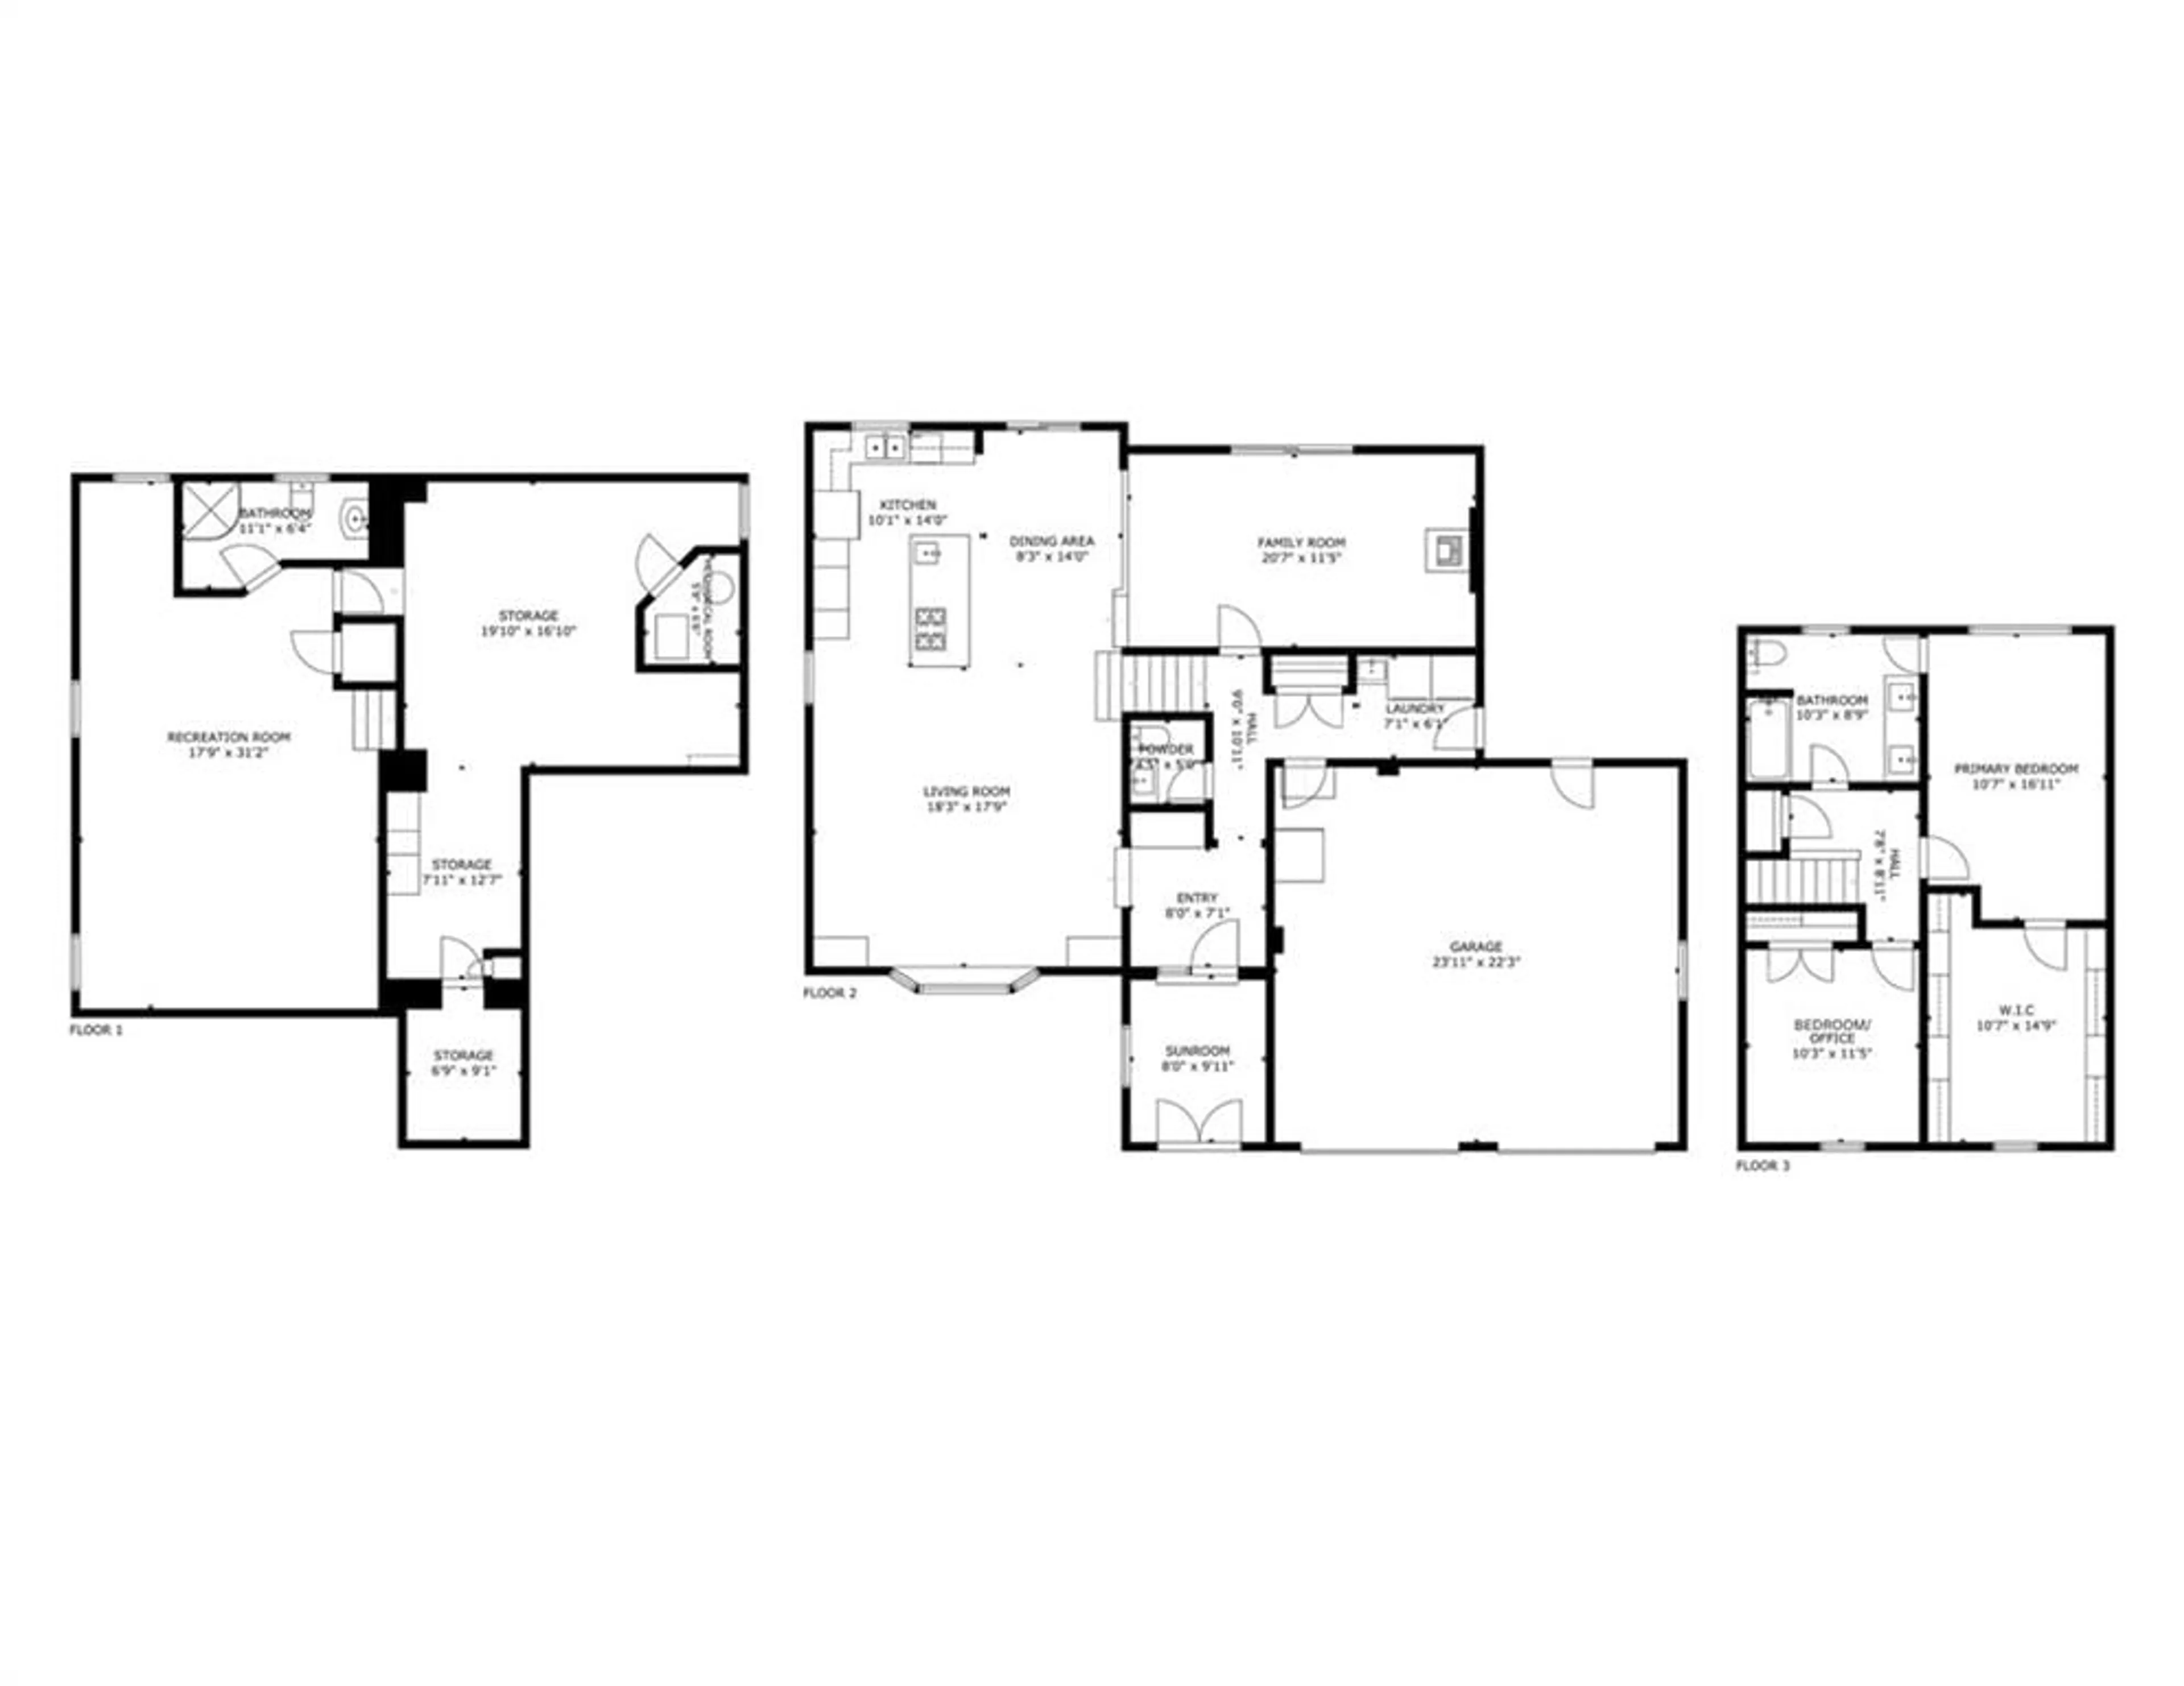 Floor plan for 5 LOWER CANADA Dr, Niagara-on-the-Lake Ontario L0S 1J0